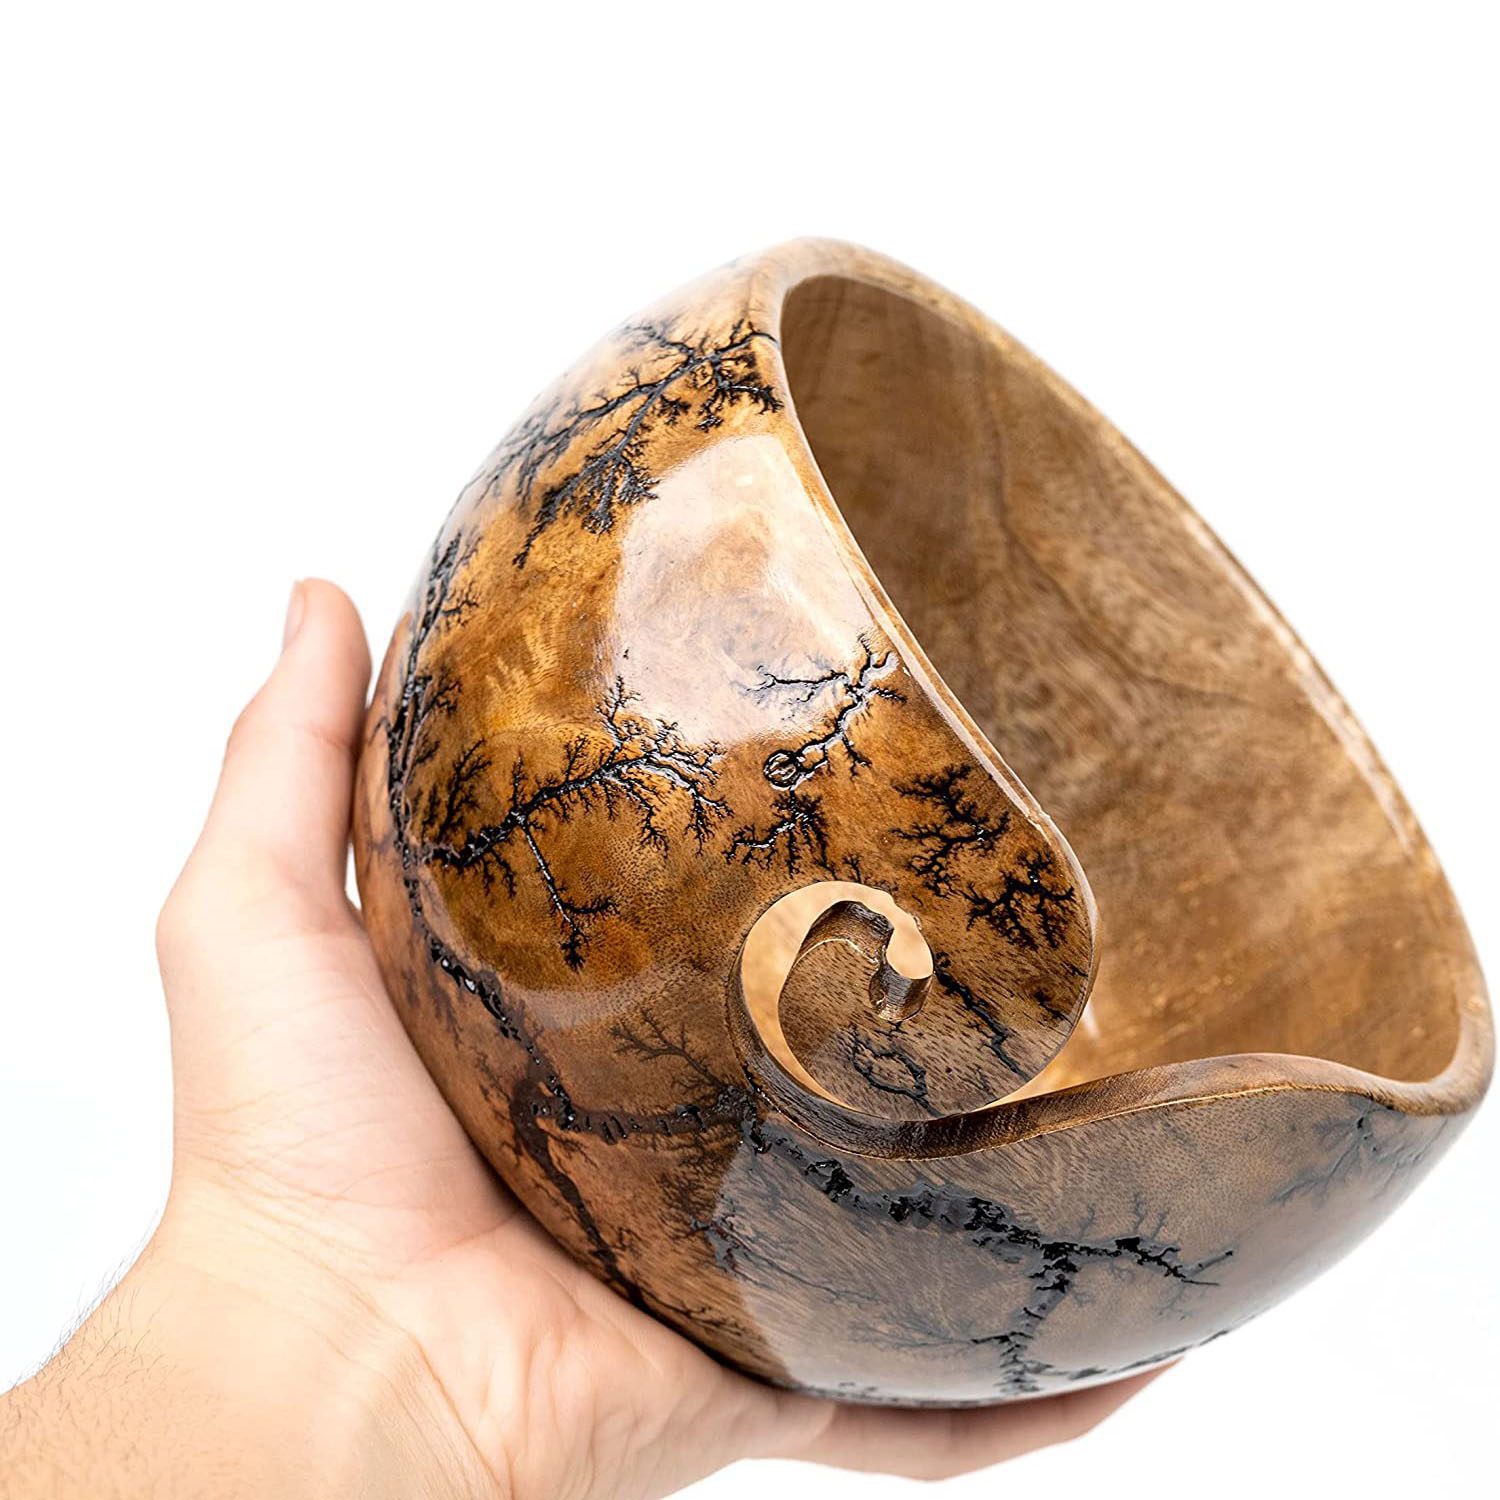 Handcrafted Wooden Knitting Bowl | Unique Trendy Yarn bowl| Knitting & Crocheting Accessories